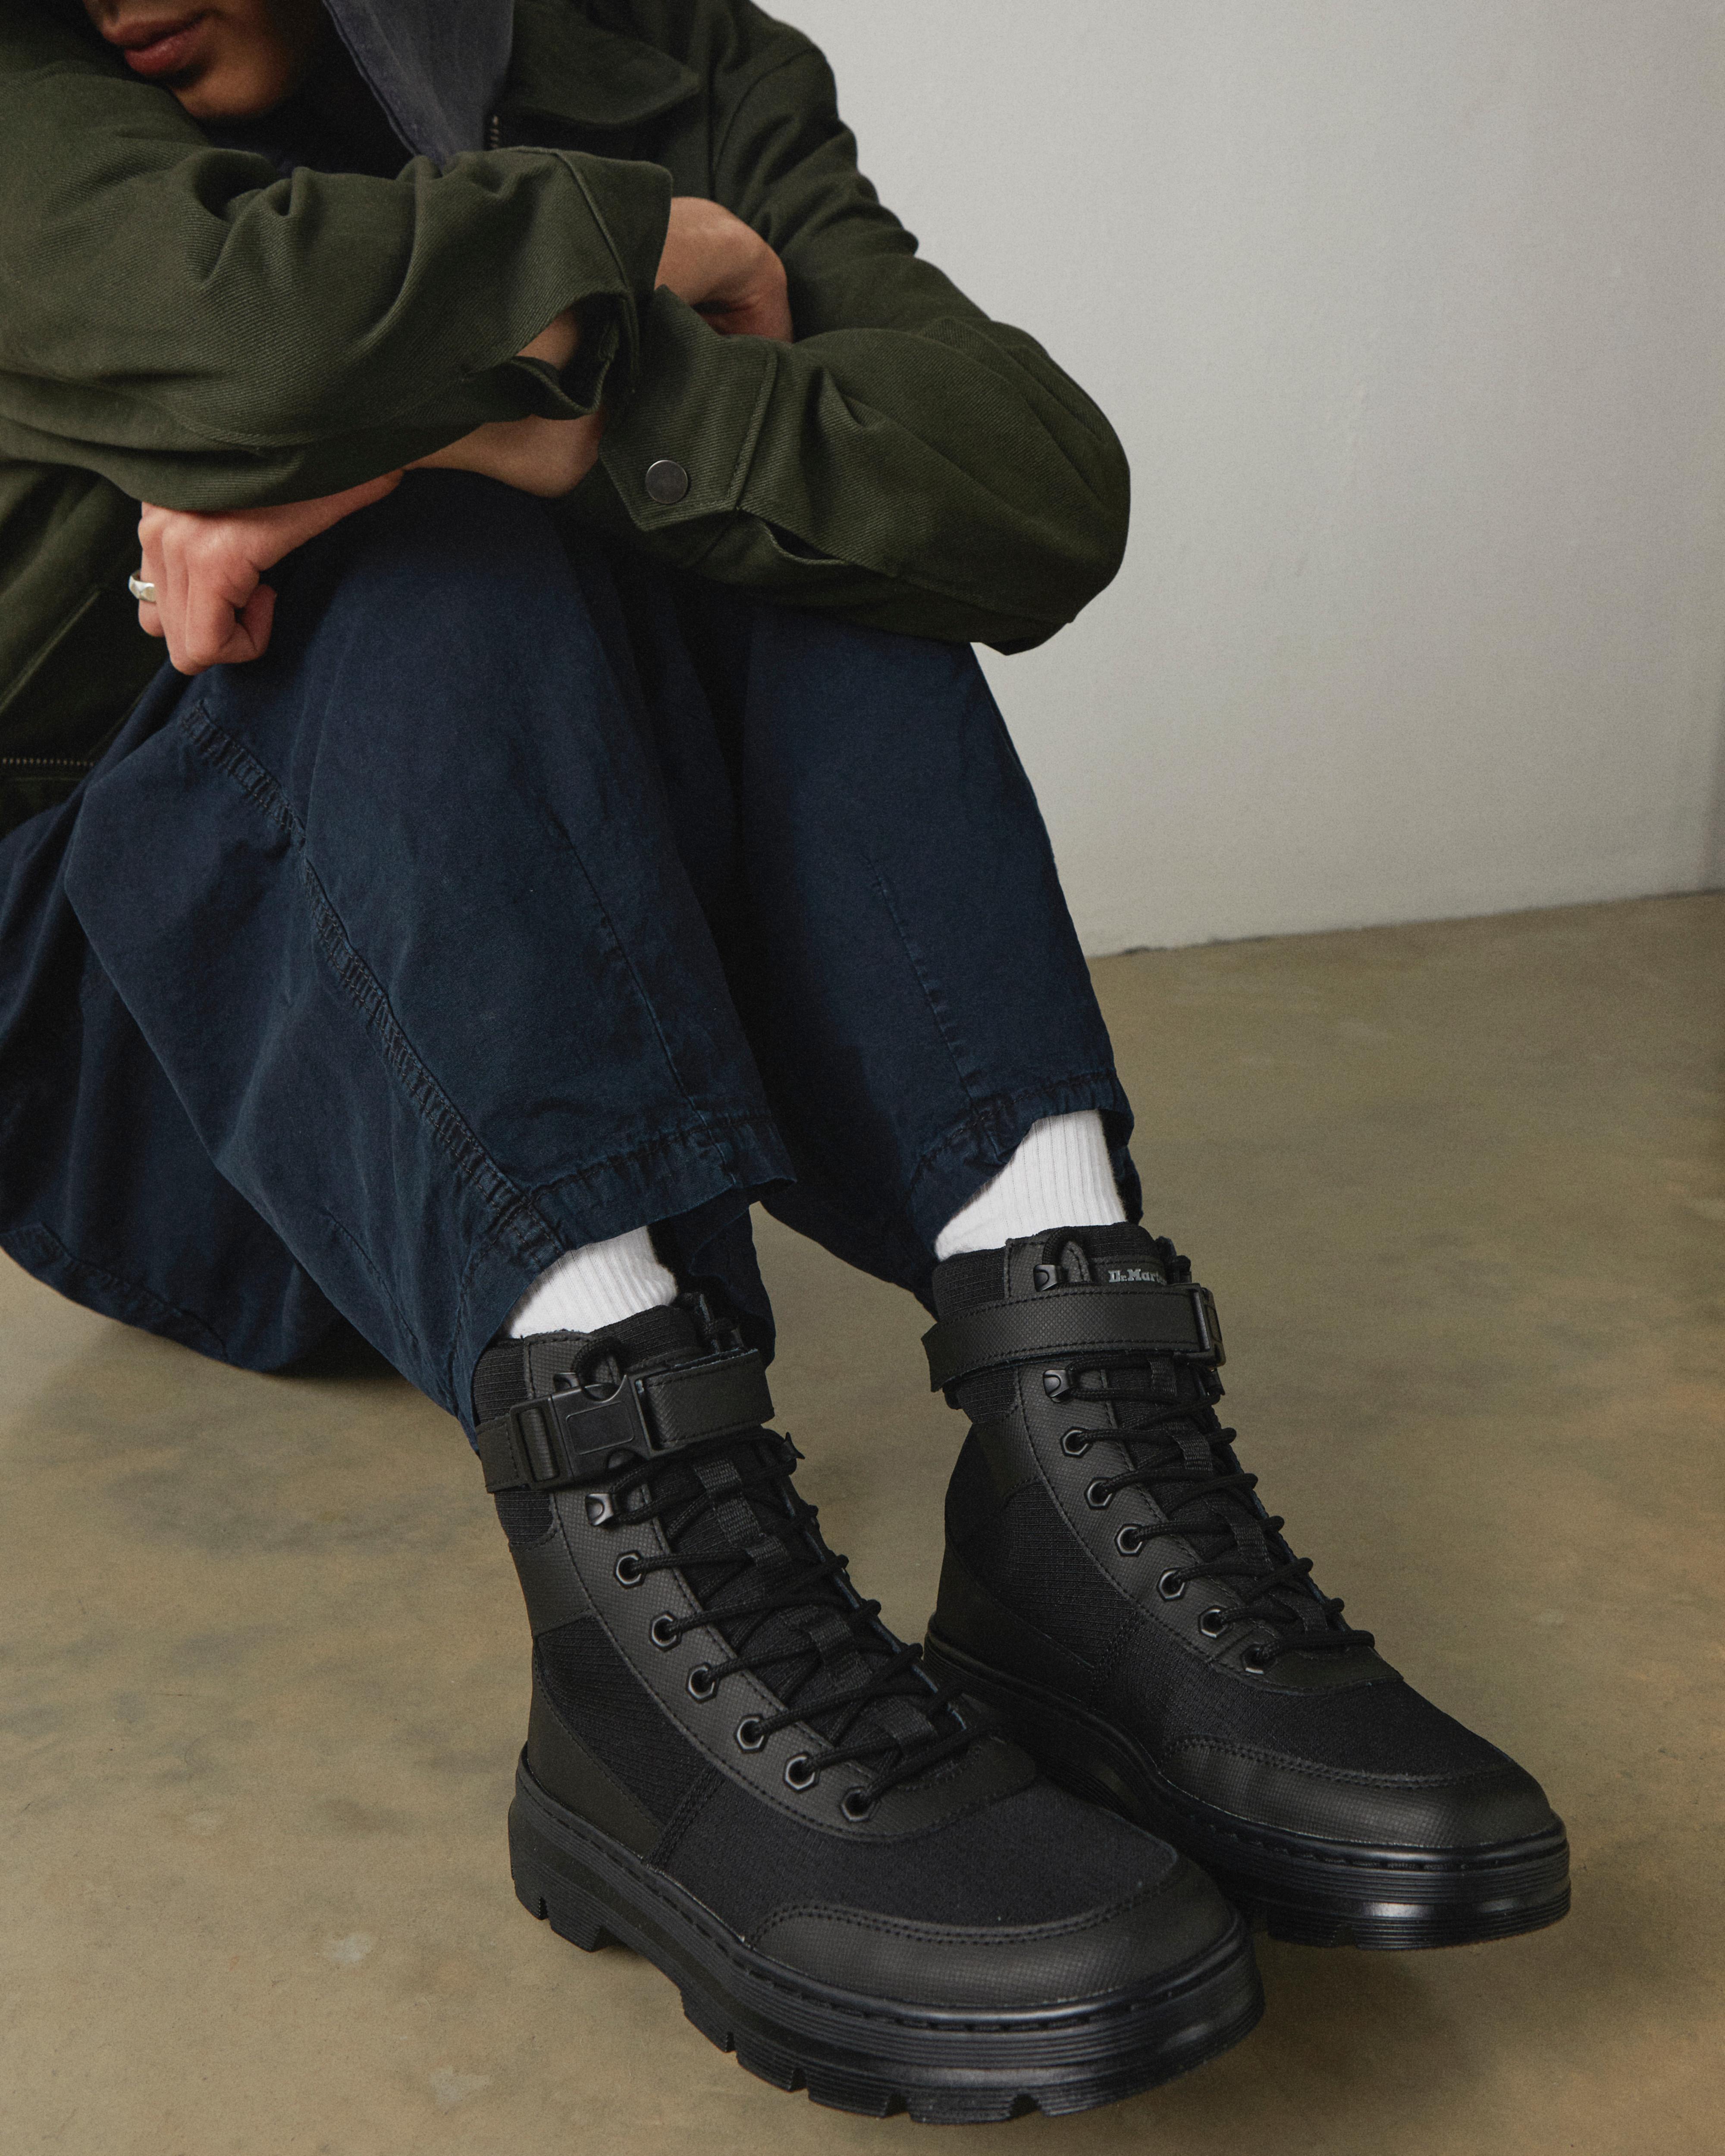 COMBS TECH POLY CASUAL BOOTS | Dr. Martens